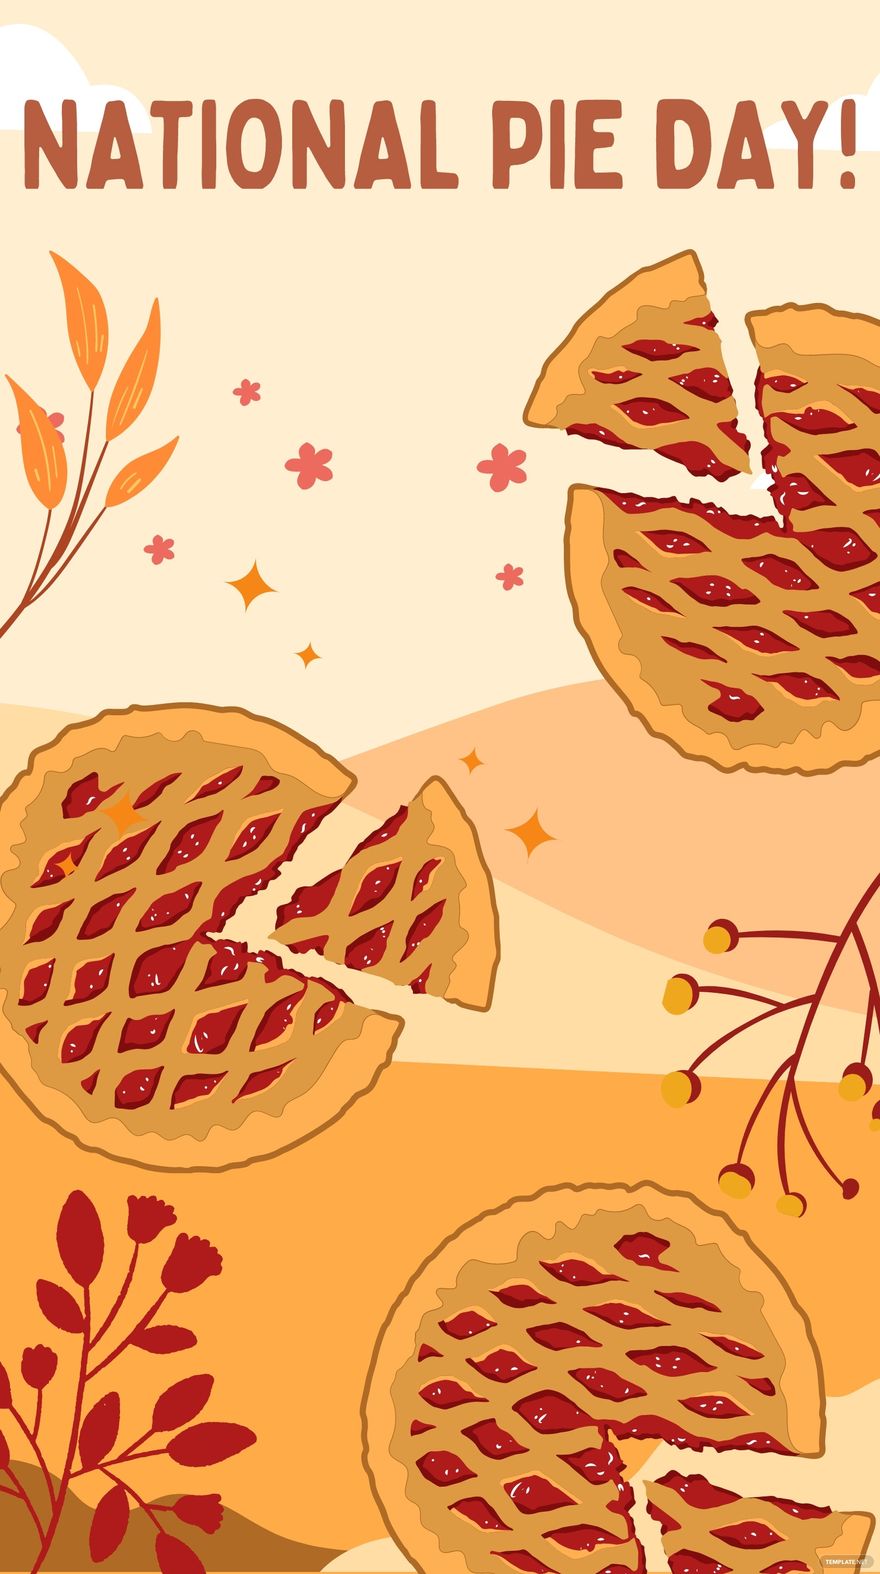 National Pie Day iPhone Background in PDF, Illustrator, PSD, EPS, SVG, JPG, PNG